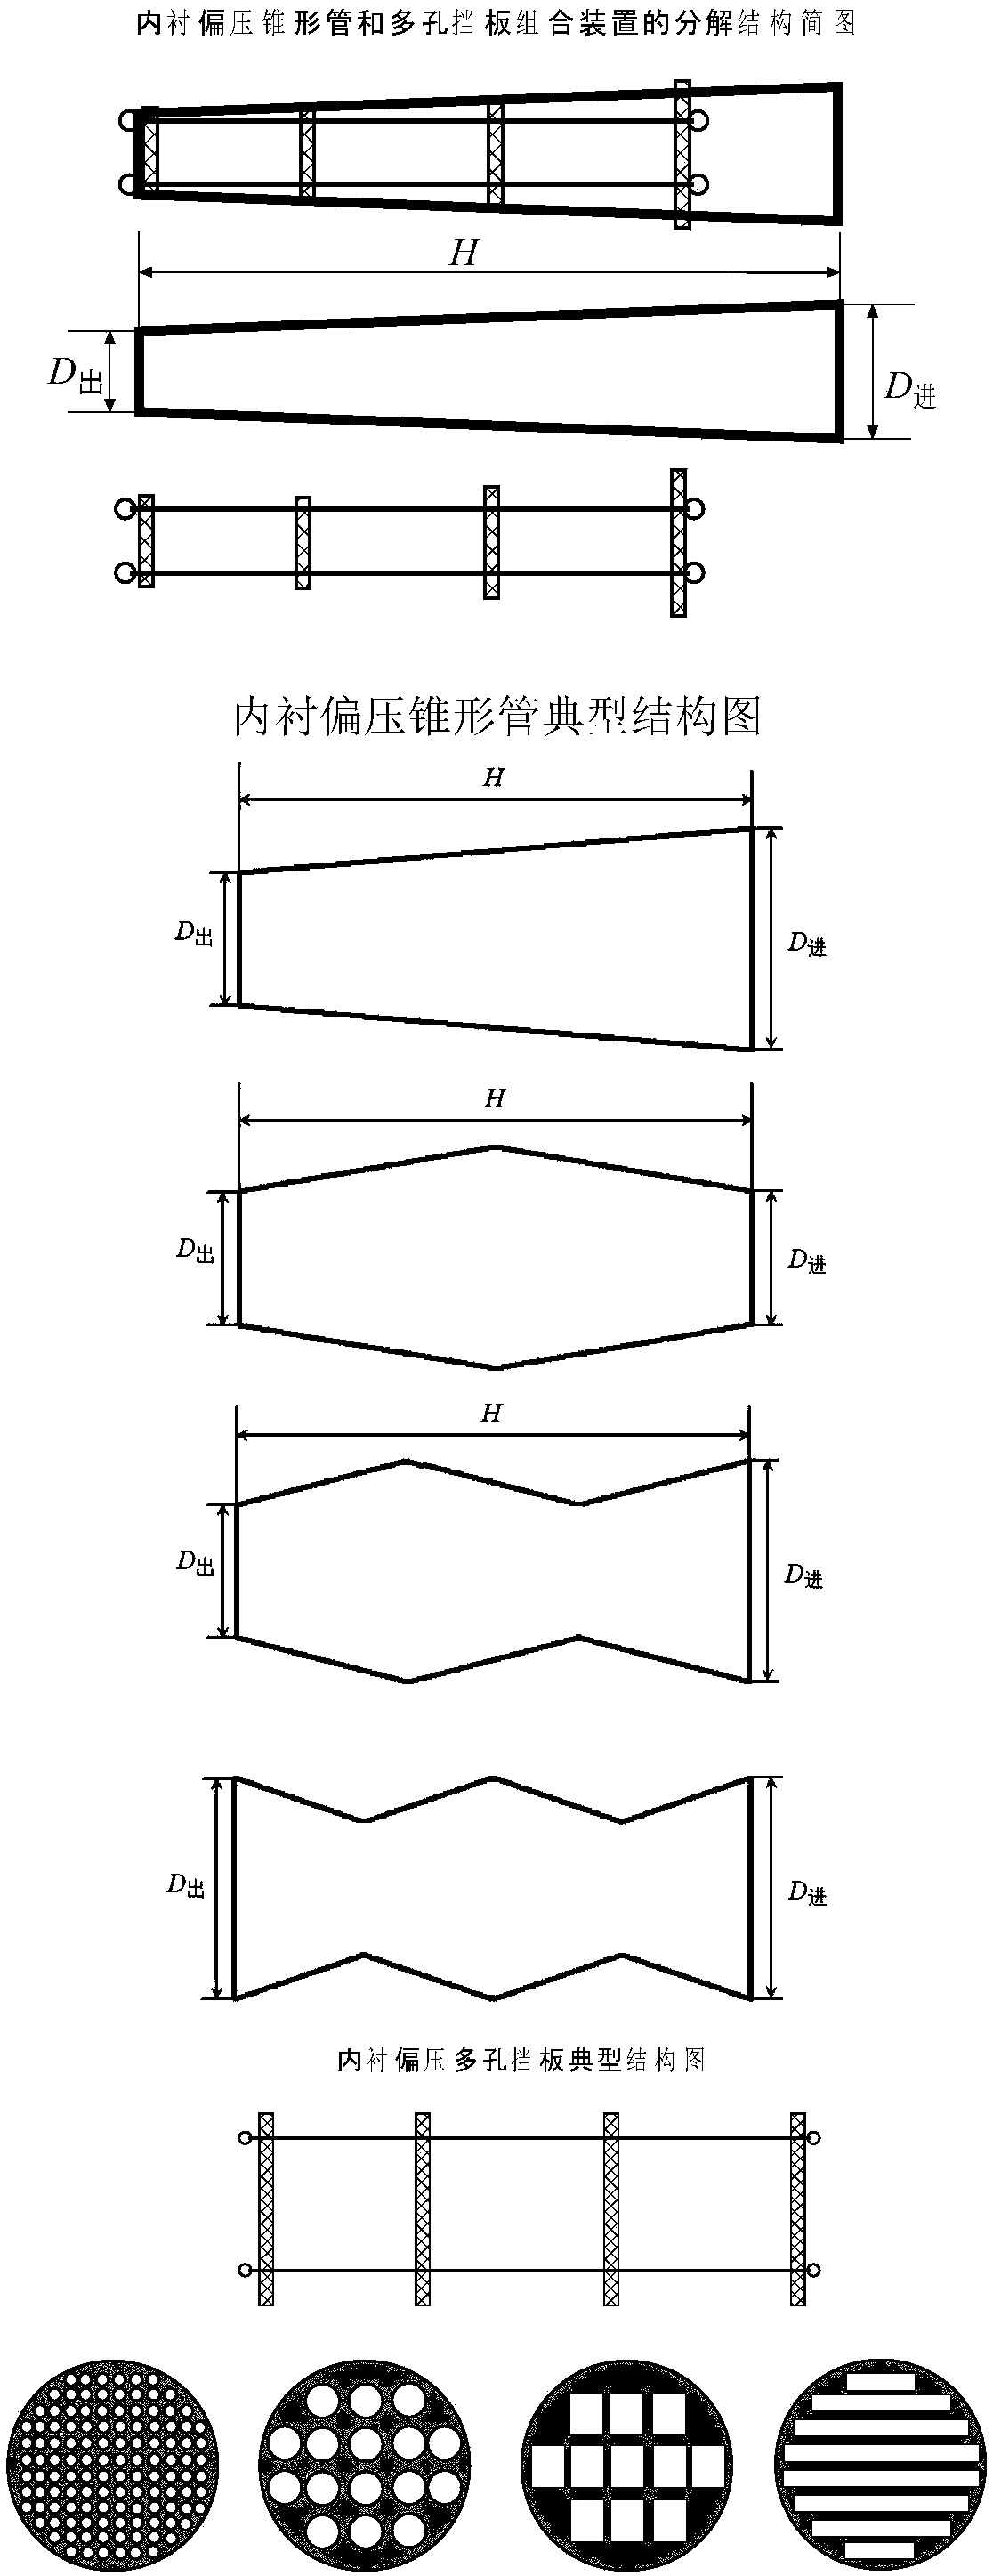 Combination magnetic field and lining tapered tube-porous baffle compounded vacuum deposition method